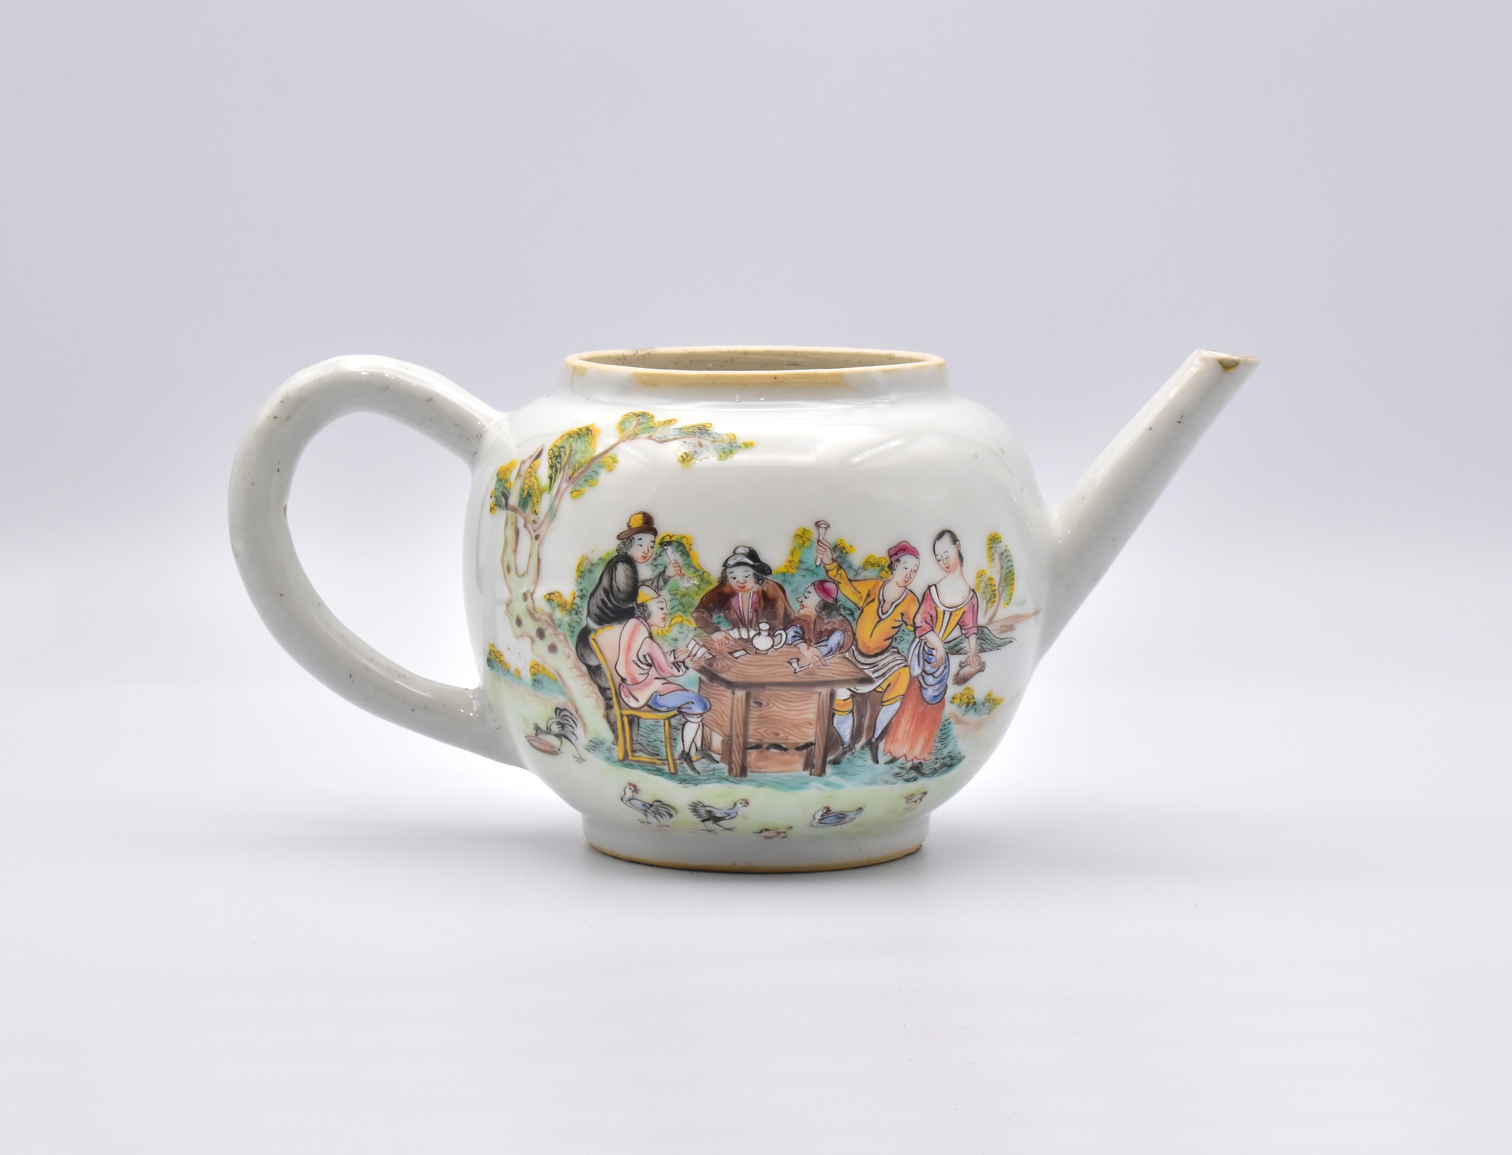 A VERY RARE CHINESE ‘FAMILLE-ROSE’ PORCELAIN TEAPOT, QING DYNASTY, QIANLONG PERIOD, 1736 - 1795